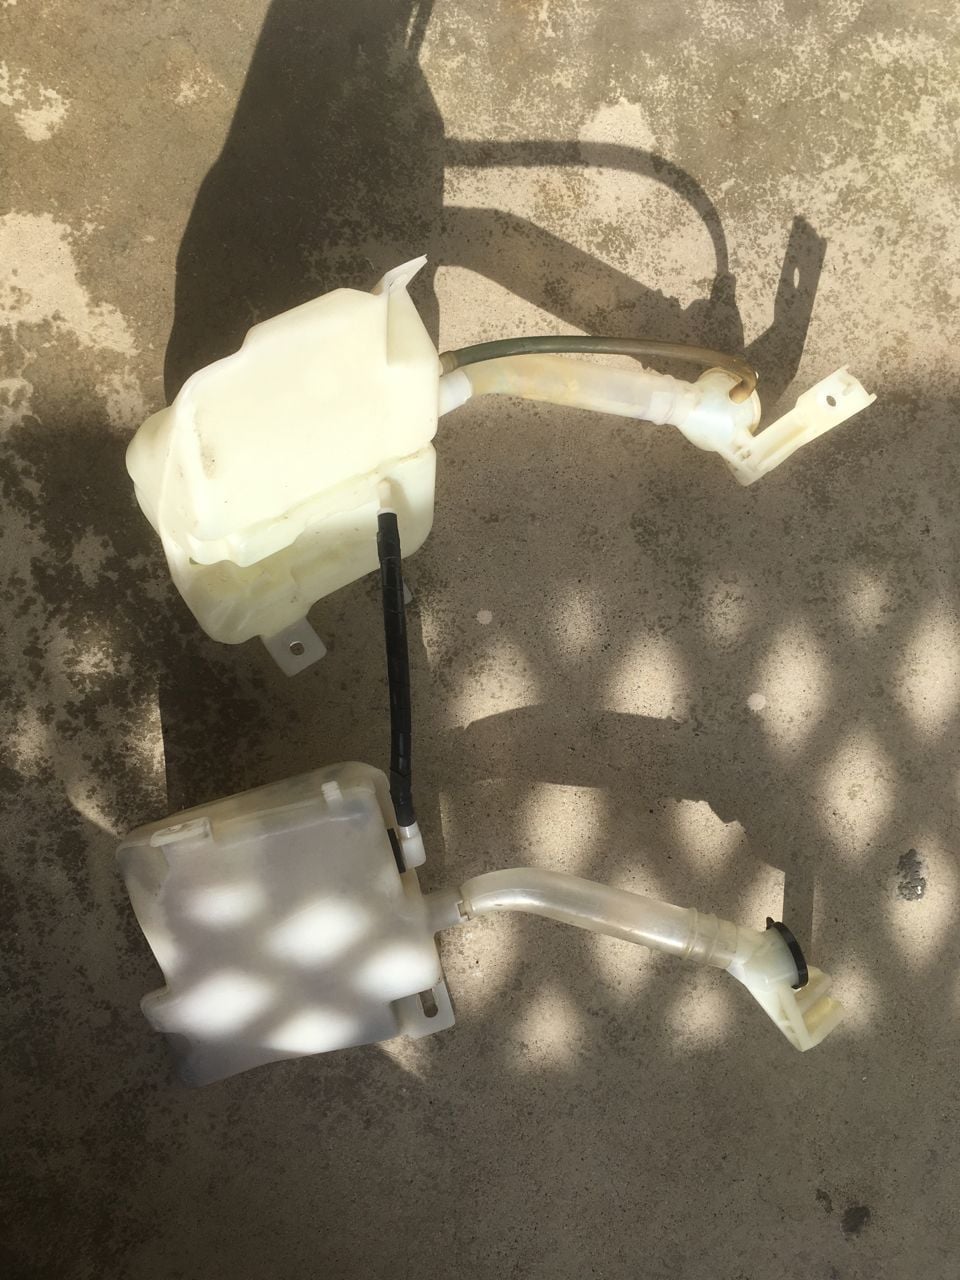 1993 Mazda RX-7 - coolant expansion tank - Engine - Complete - $20 - Seal Beach, CA 90740, United States